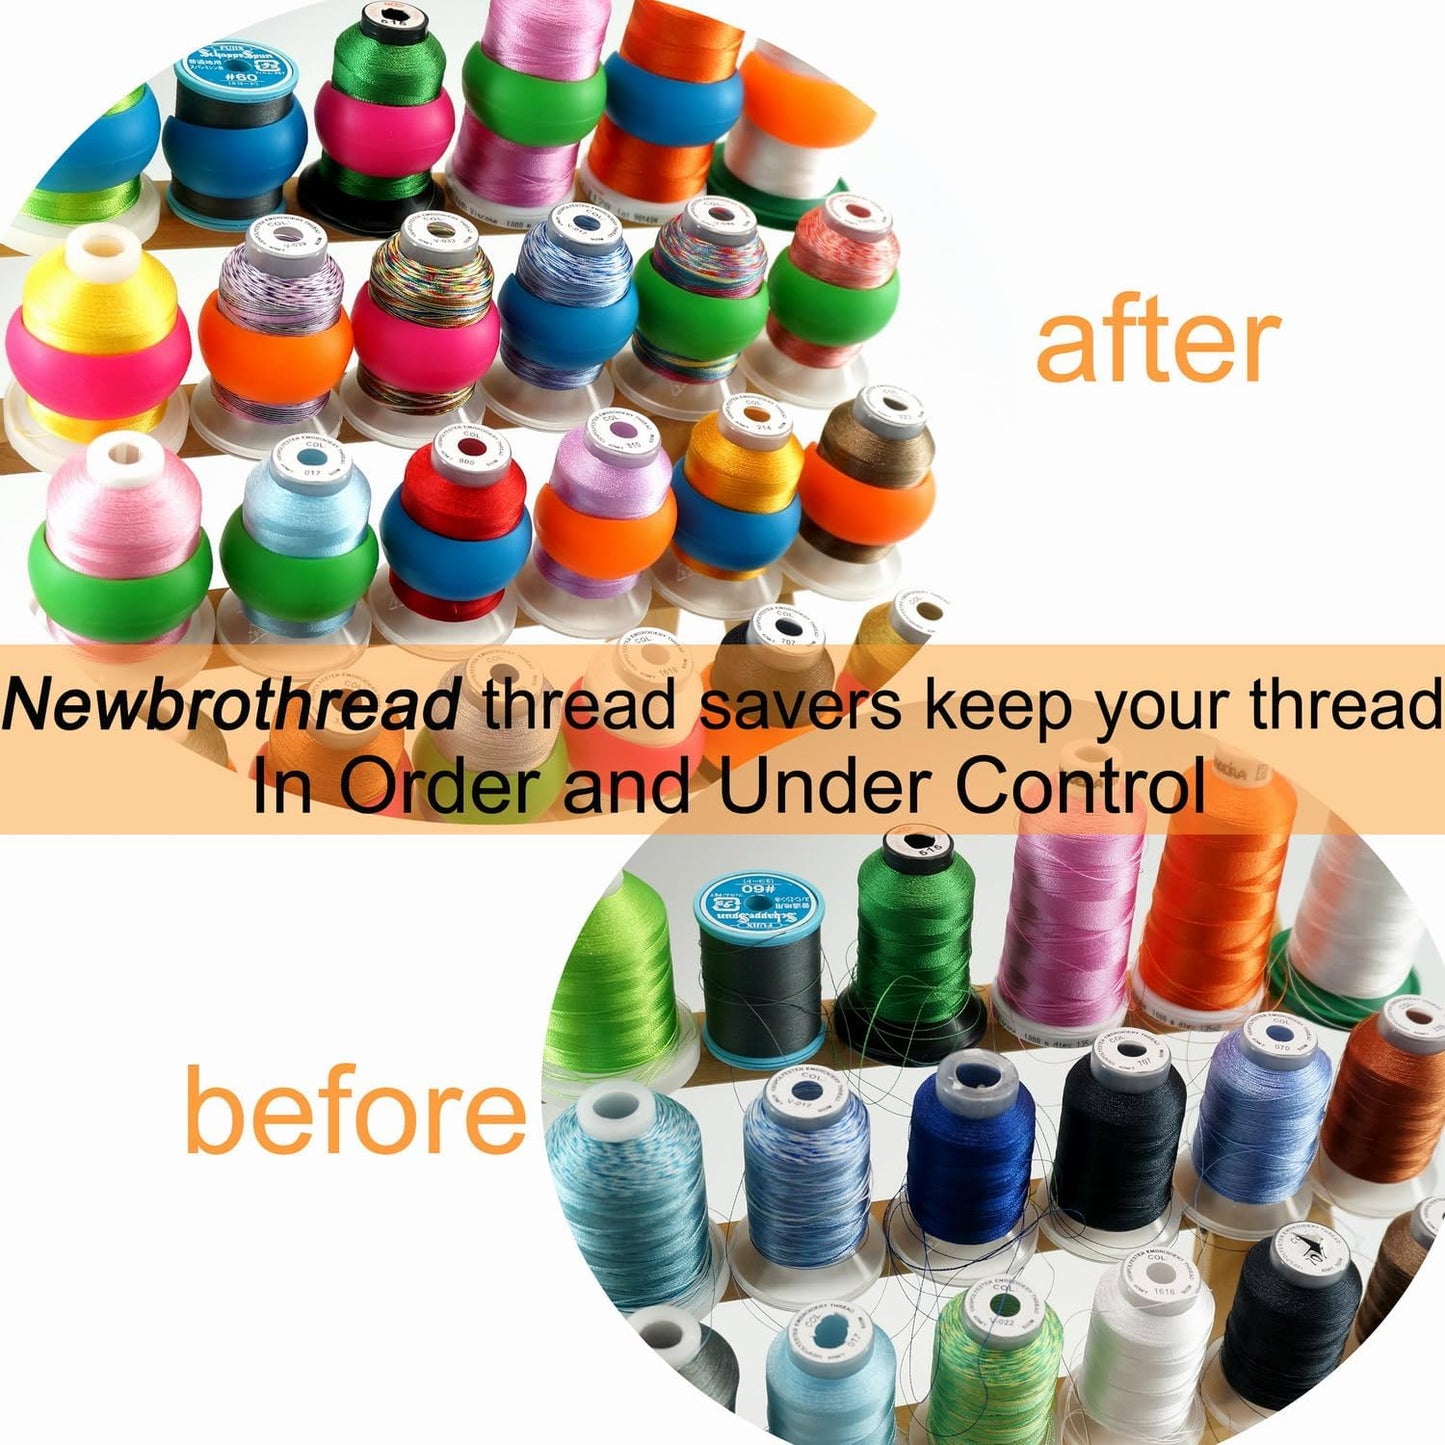 100Pcs Thread Spool Savers/Spool Huggers - Prevent Thread Tails from Unwinding - No Loose Ends for Sewing and Embroidery Machine Thread Spools